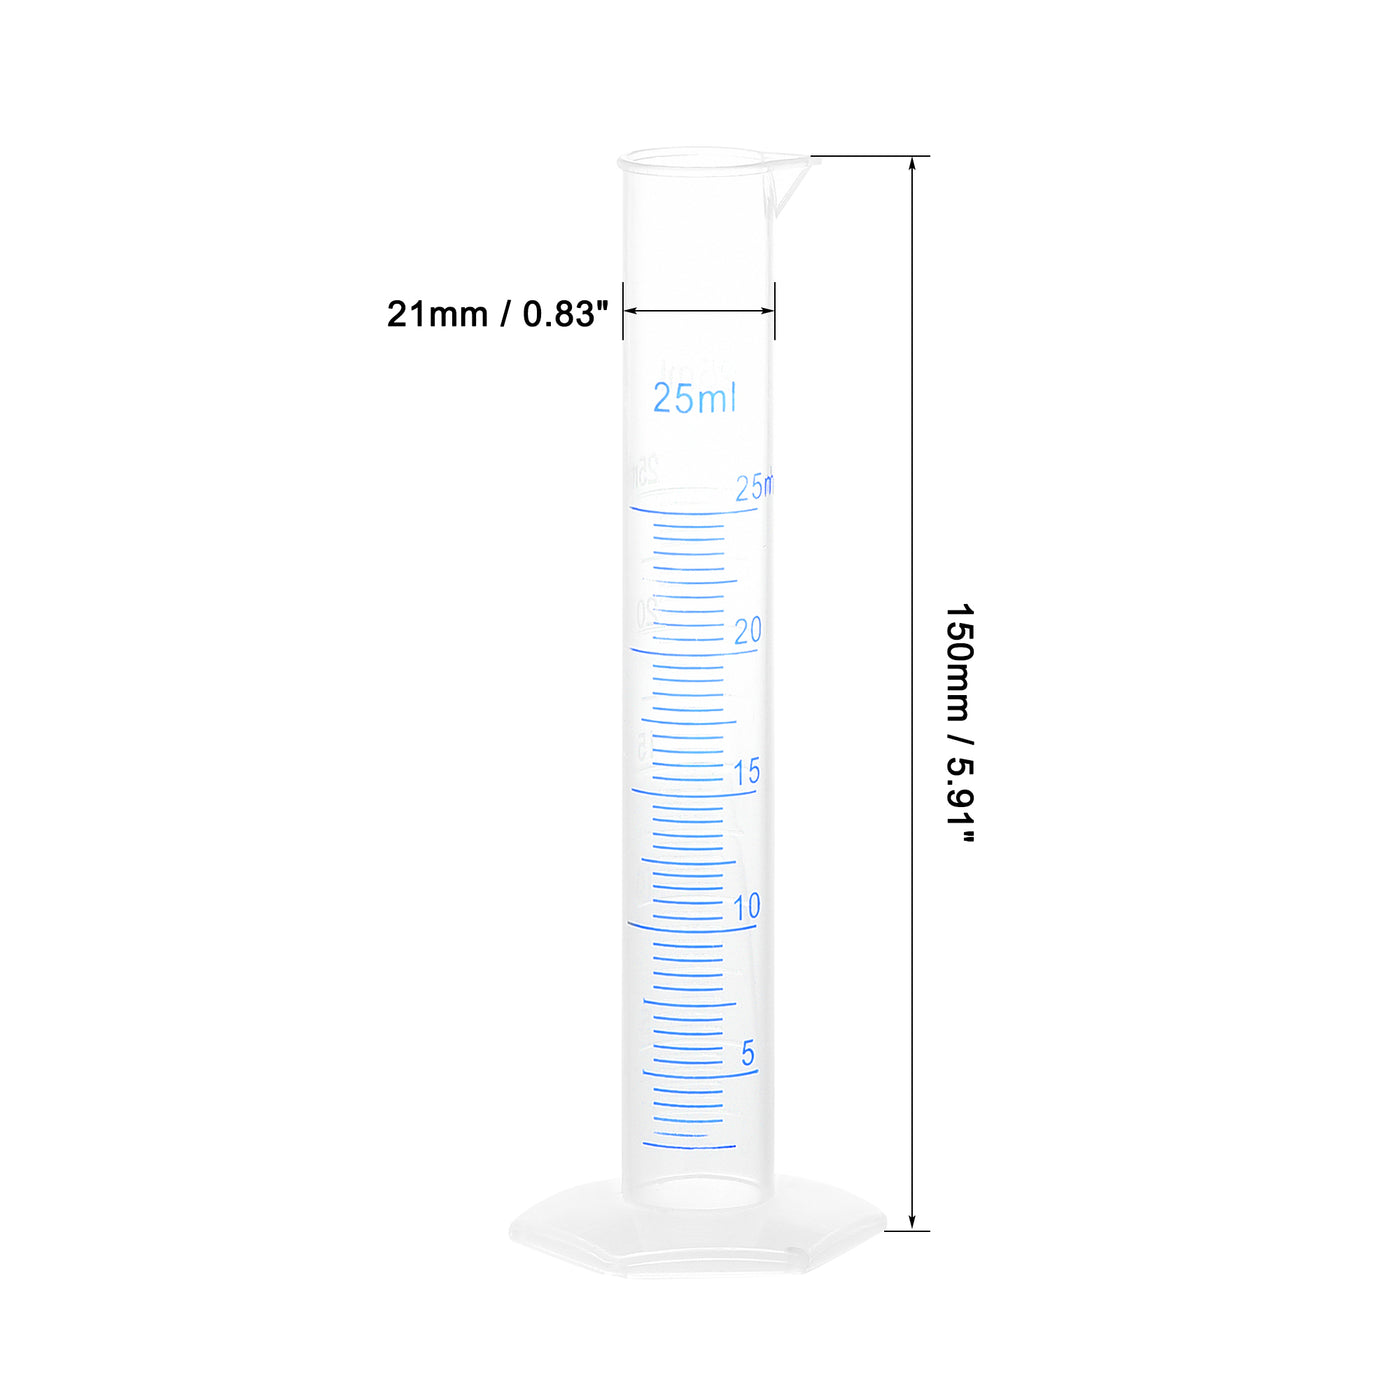 uxcell Uxcell Plastic Graduated Cylinder, 25ml Measuring Cylinder, 2-Sided Metric Marking